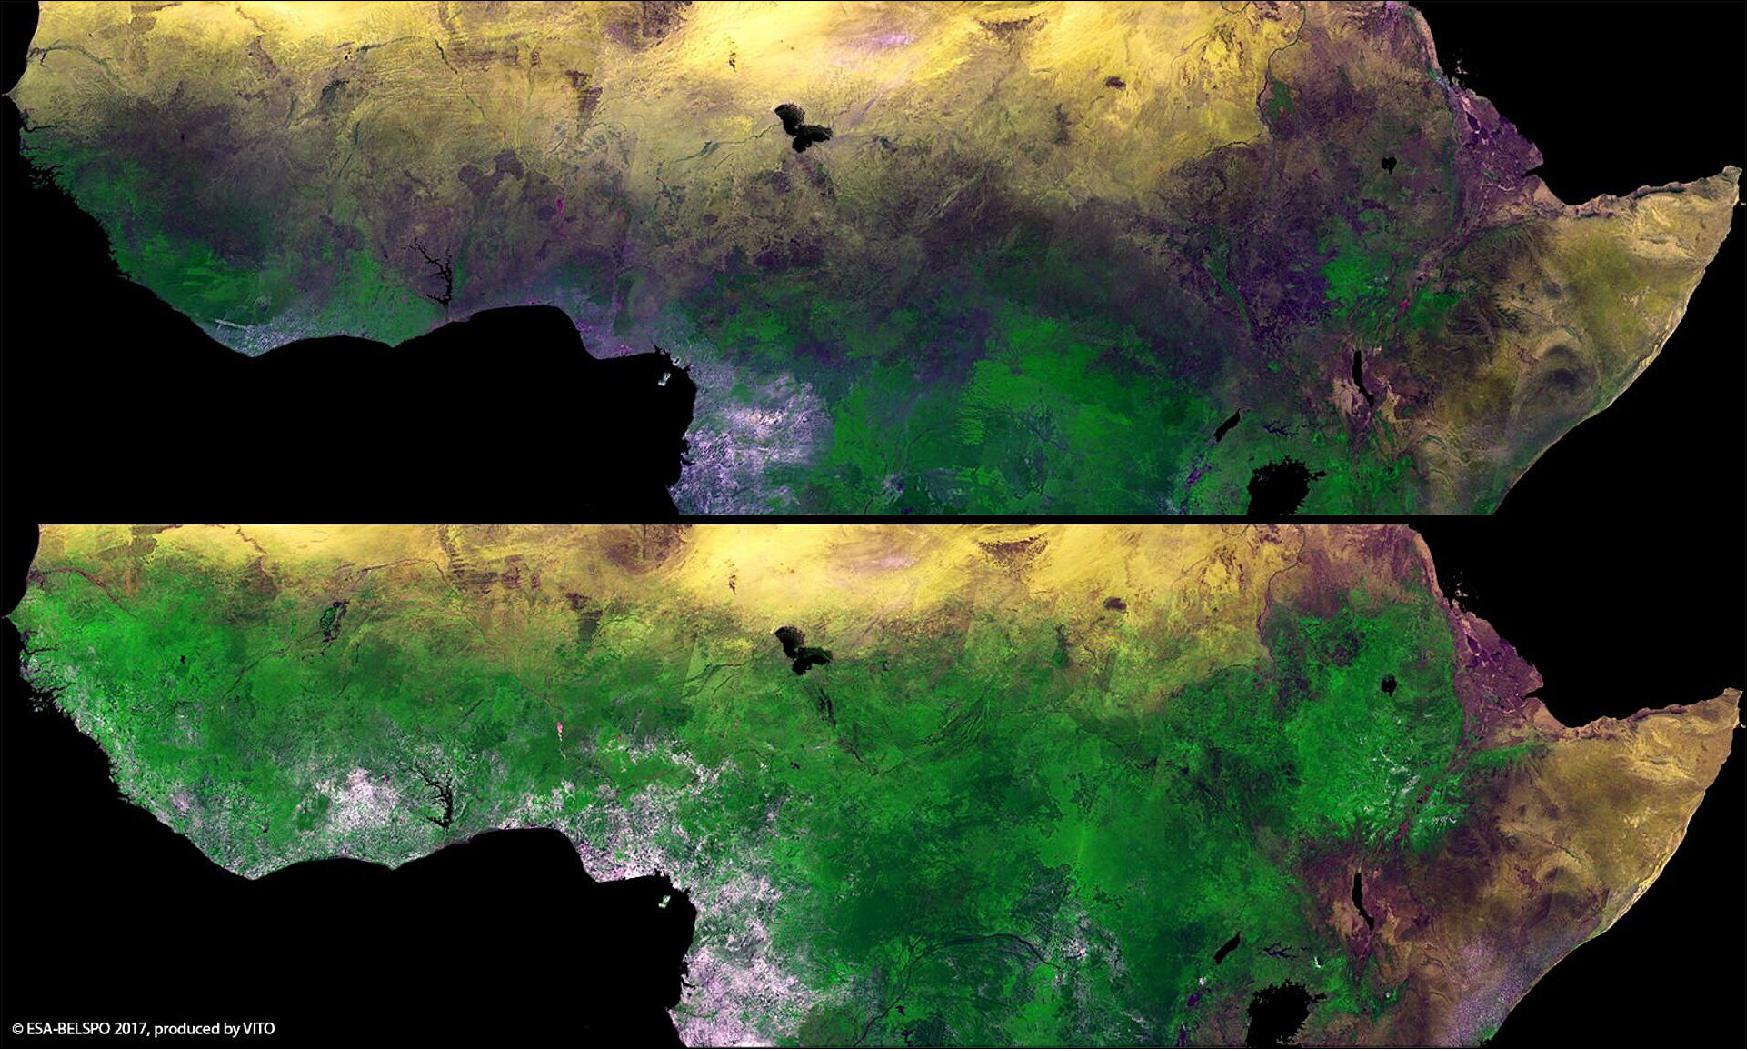 Figure 19: ESA's PROBA-V minisatellite reveals the seasonal changes in Africa's sub-Saharan Sahel, with the rainy season allowing vegetation to blossom between February (top) and September (bottom). The semi-arid Sahel stretches more than 5000 km across Africa, from the Atlantic Ocean (Senegal, Mauritania) to the Red Sea (Sudan). The few months of the rainy season in the Sahel are much needed in these hot and sunny parts of Africa, and are critical for the food security and livelihood of their inhabitants. The name Sahel can be translated from Arabic as coast or shore, considered as the ever-shifting landward ‘coastline' of the arid Sahara Desert (image credit: ESA/Belspo – produced by VITO)